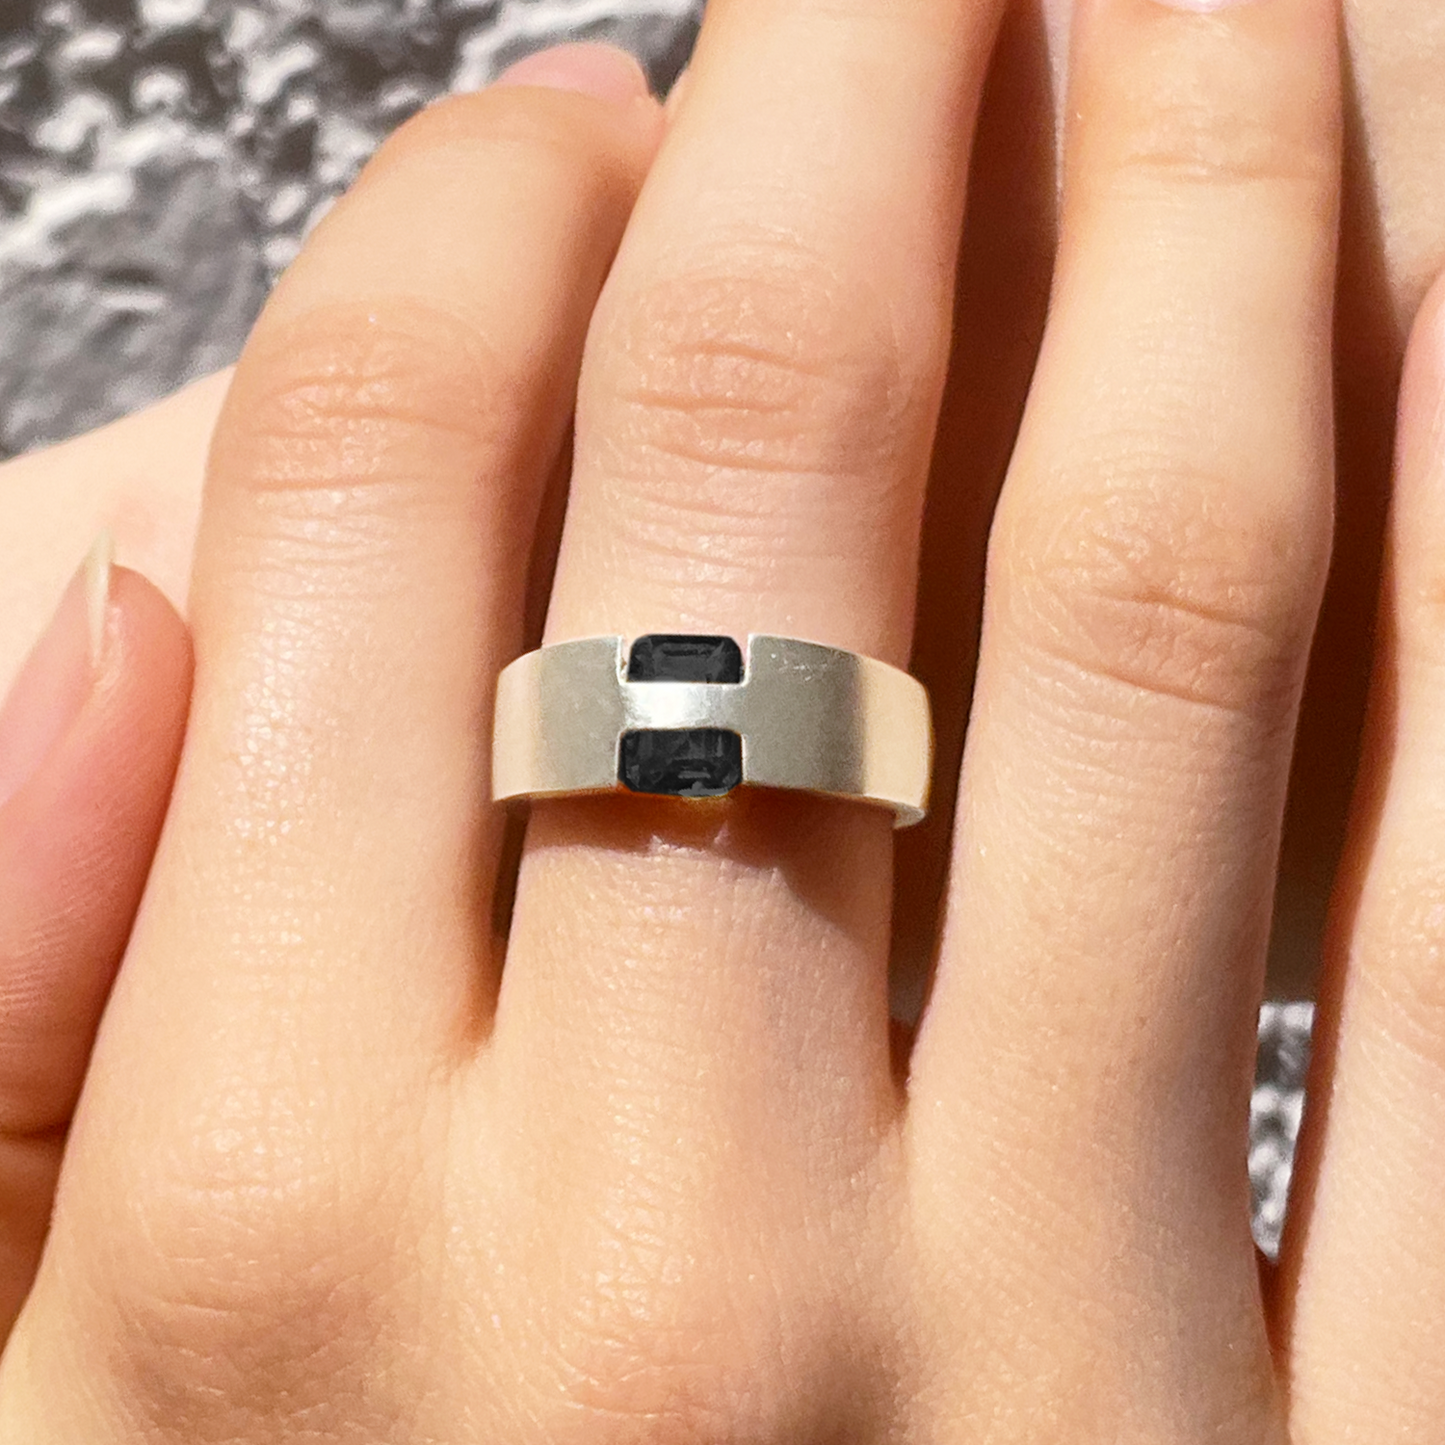 [Black onyx] hide and sparkle silver #exploring